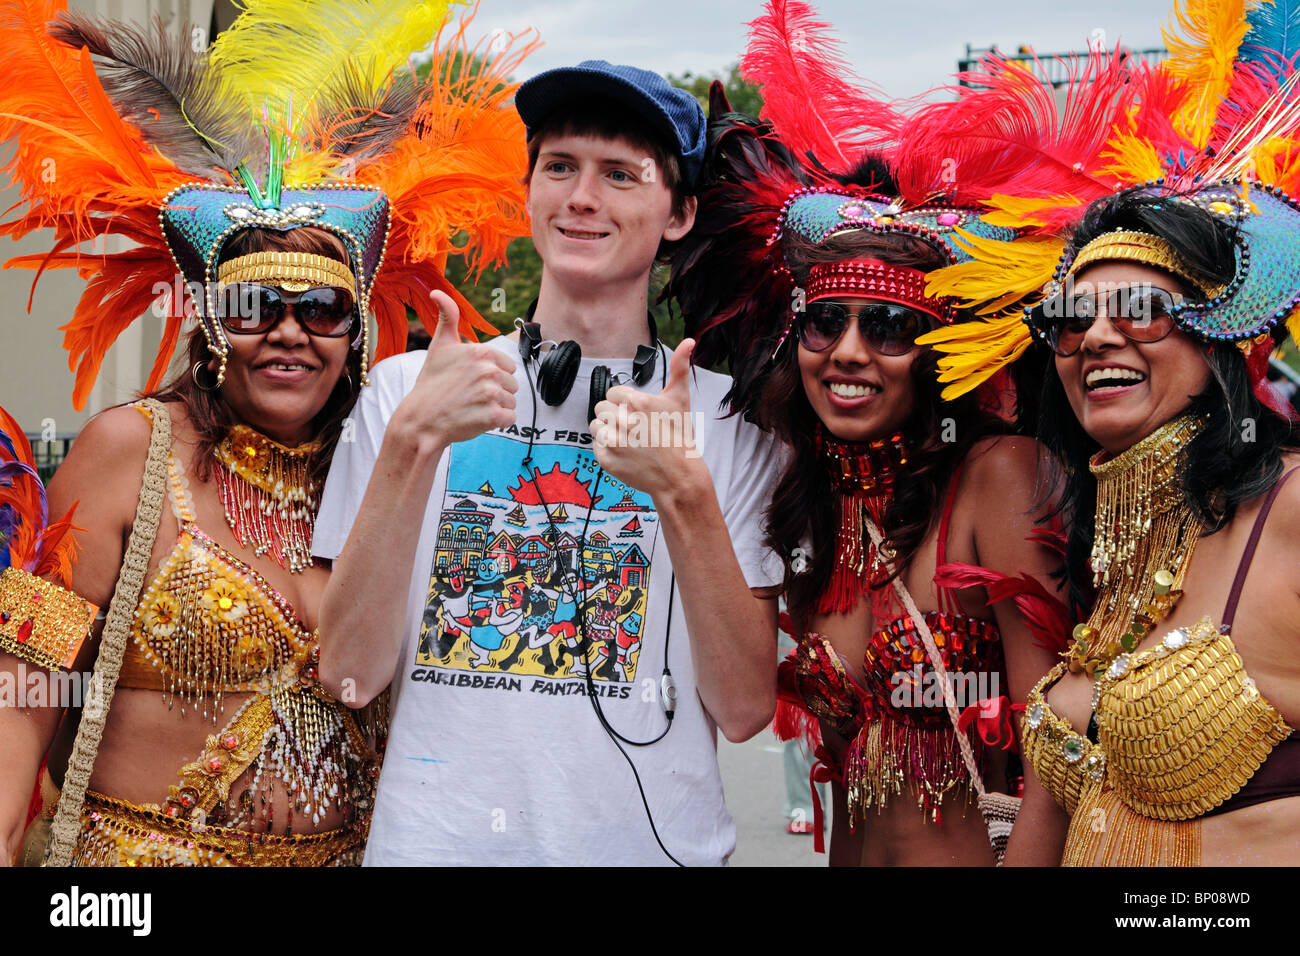 Caribana performers posing with young visitor after ScotiaBank Parade on Lake Shore Boulevard Toronto on July 31 2010. Stock Photo